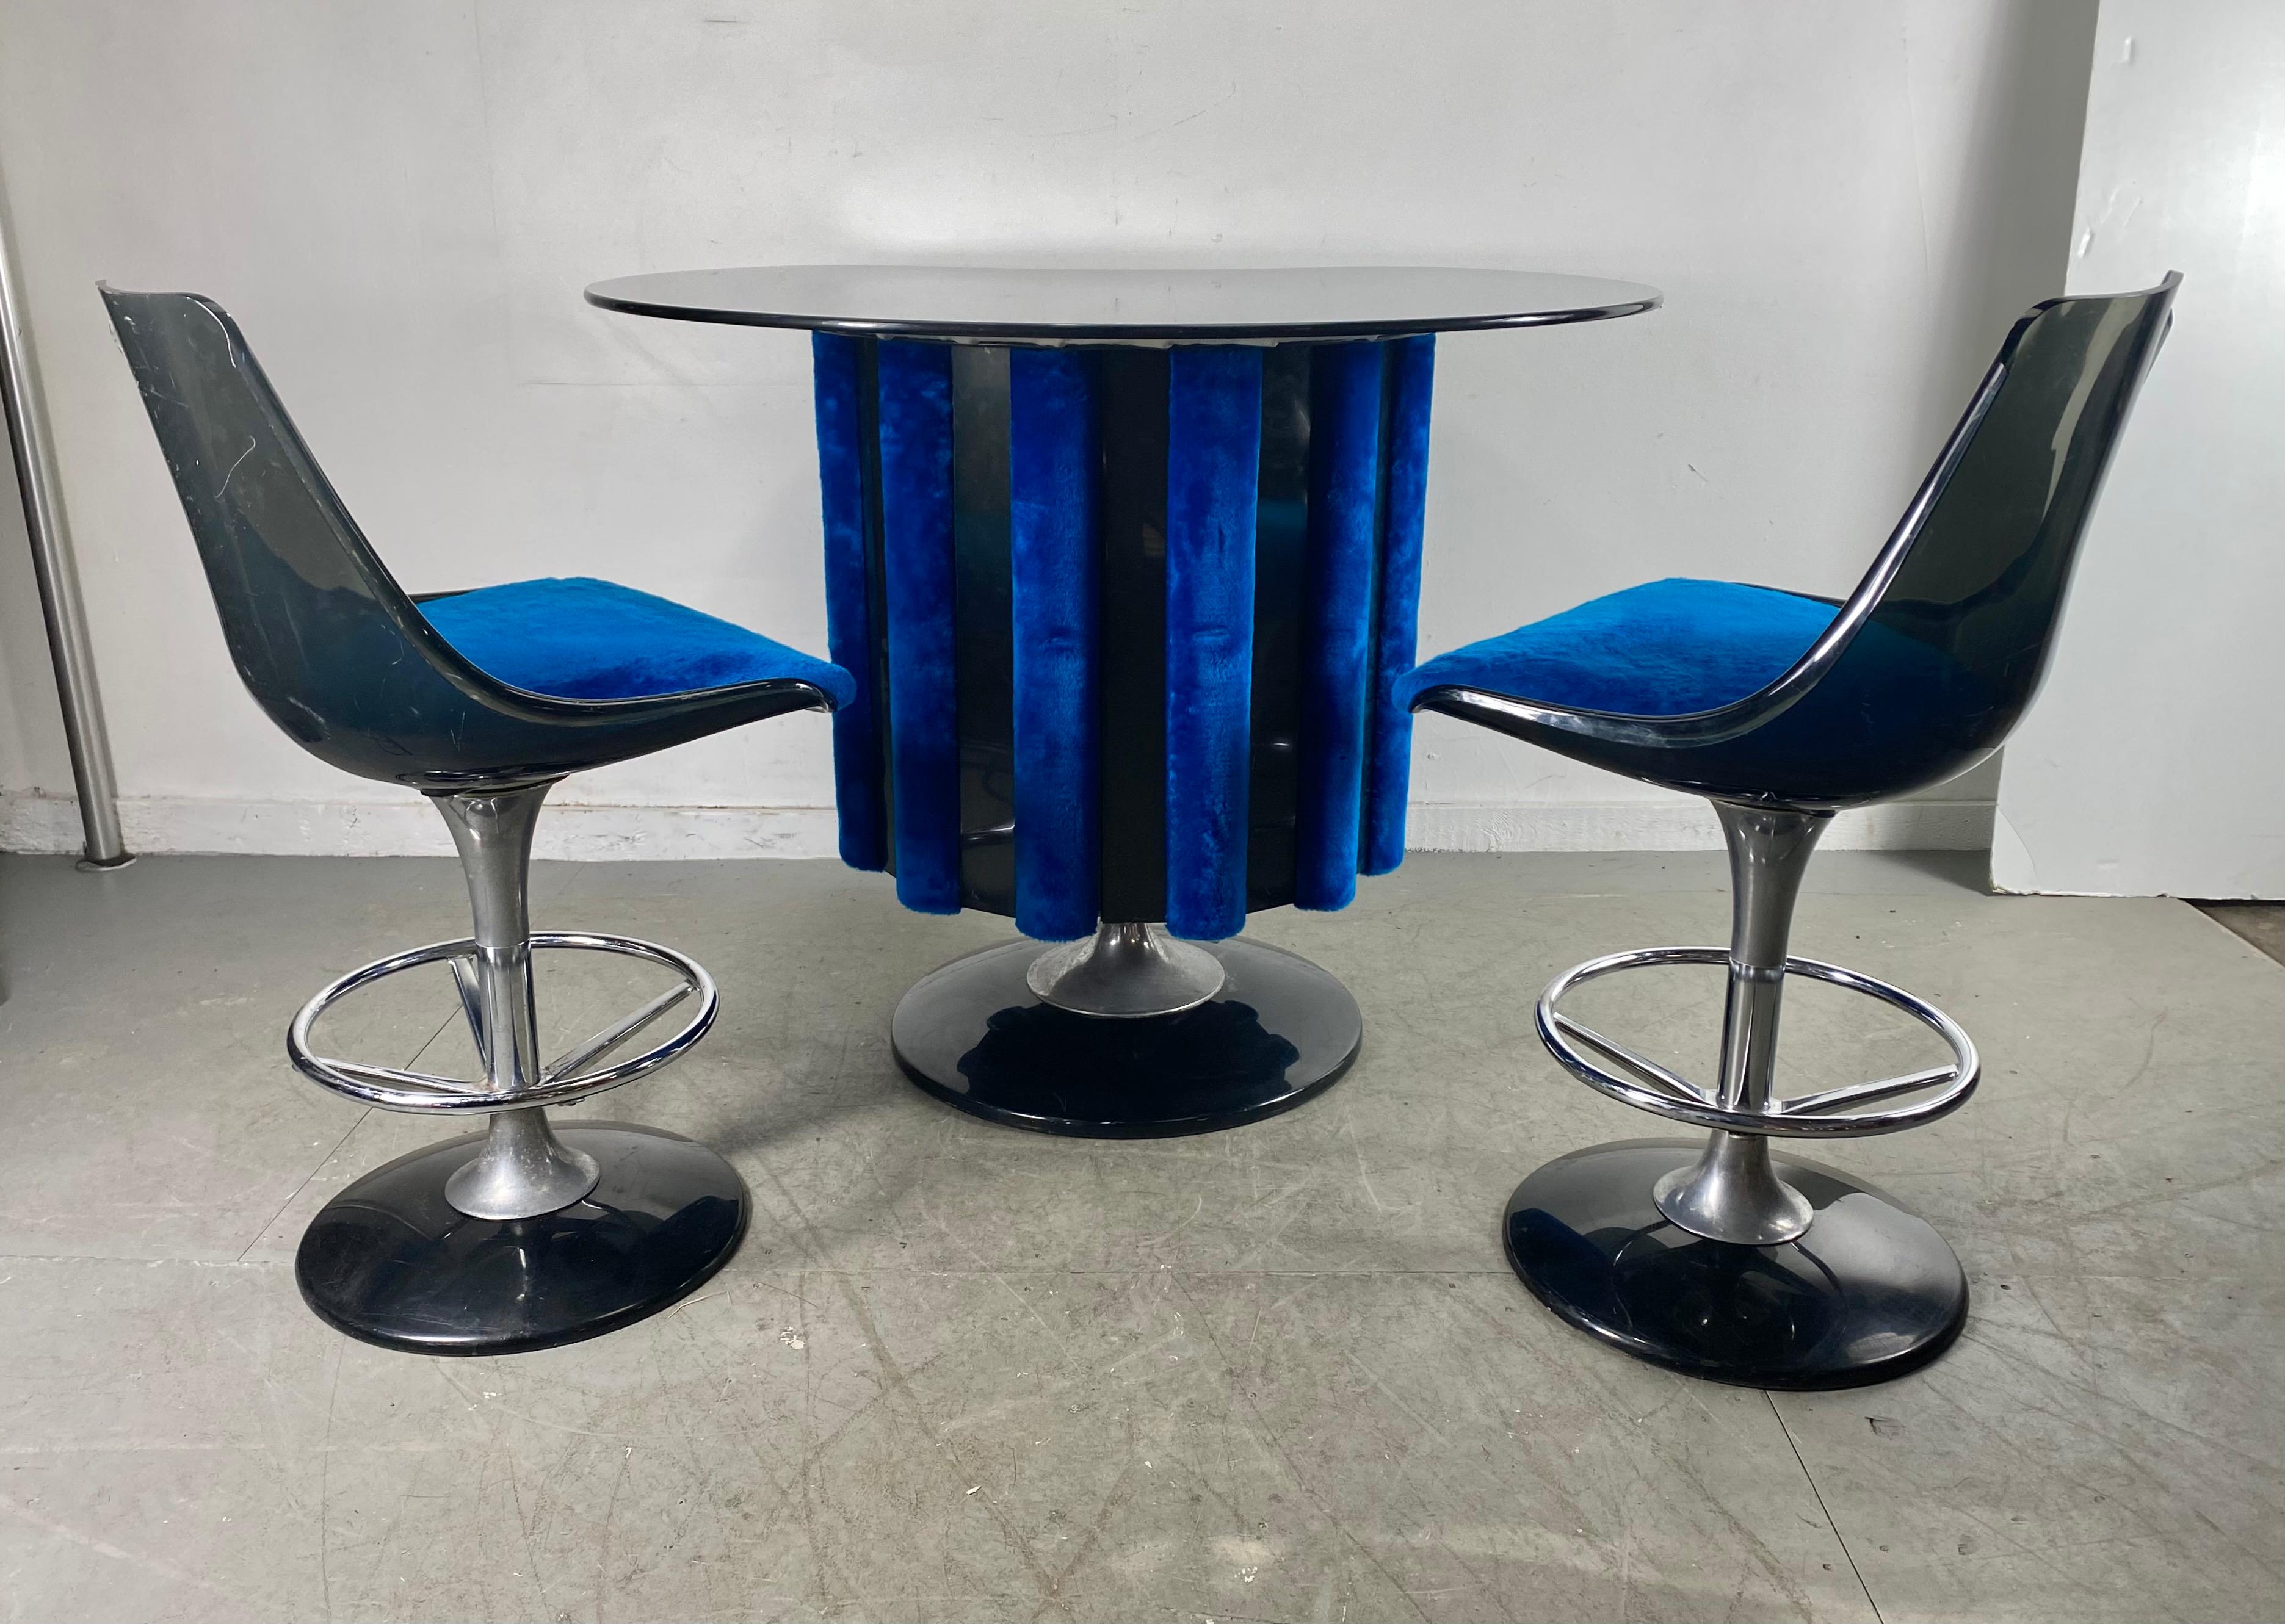 American 1970s Space Age Three-Piece Pedestal Dry Bar with Two Stools by Chrome Craft